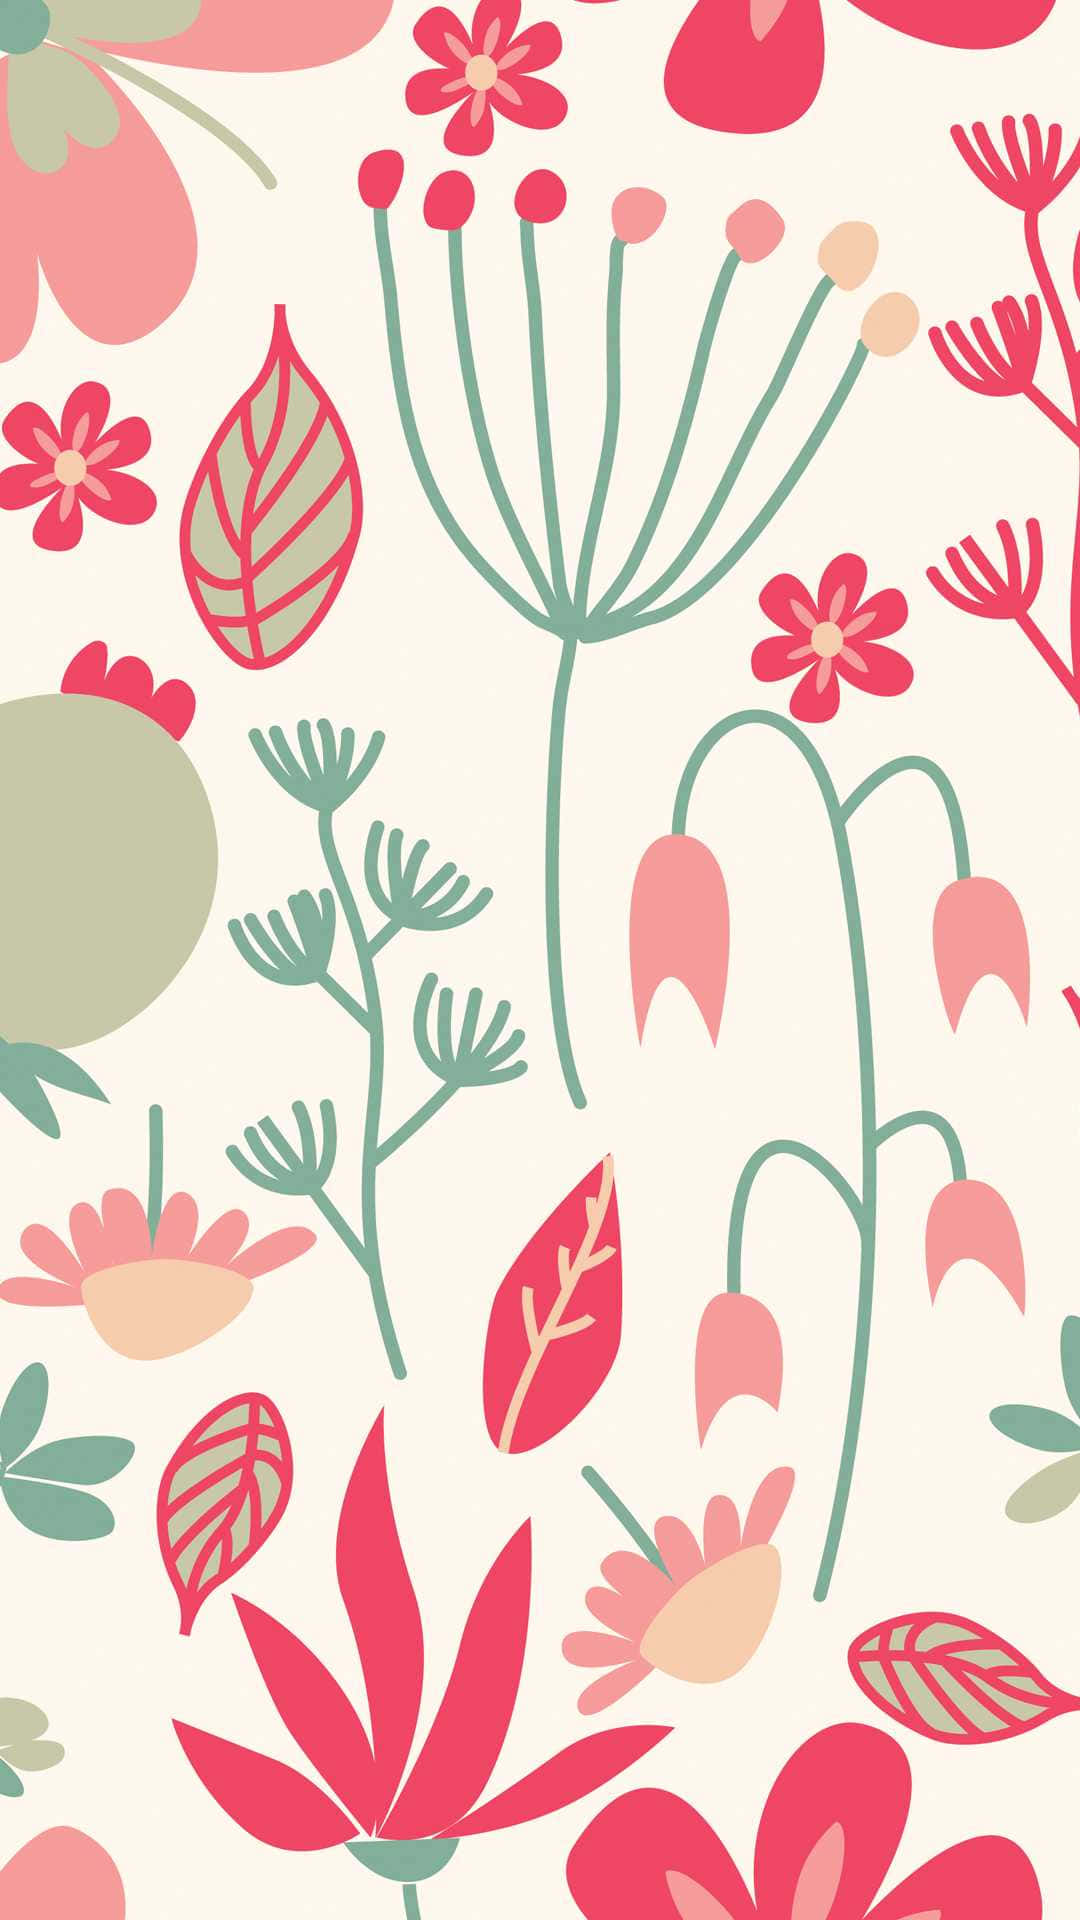 Add a Bit of Natural Beauty to Your Space with this Flower Iphone Wallpaper